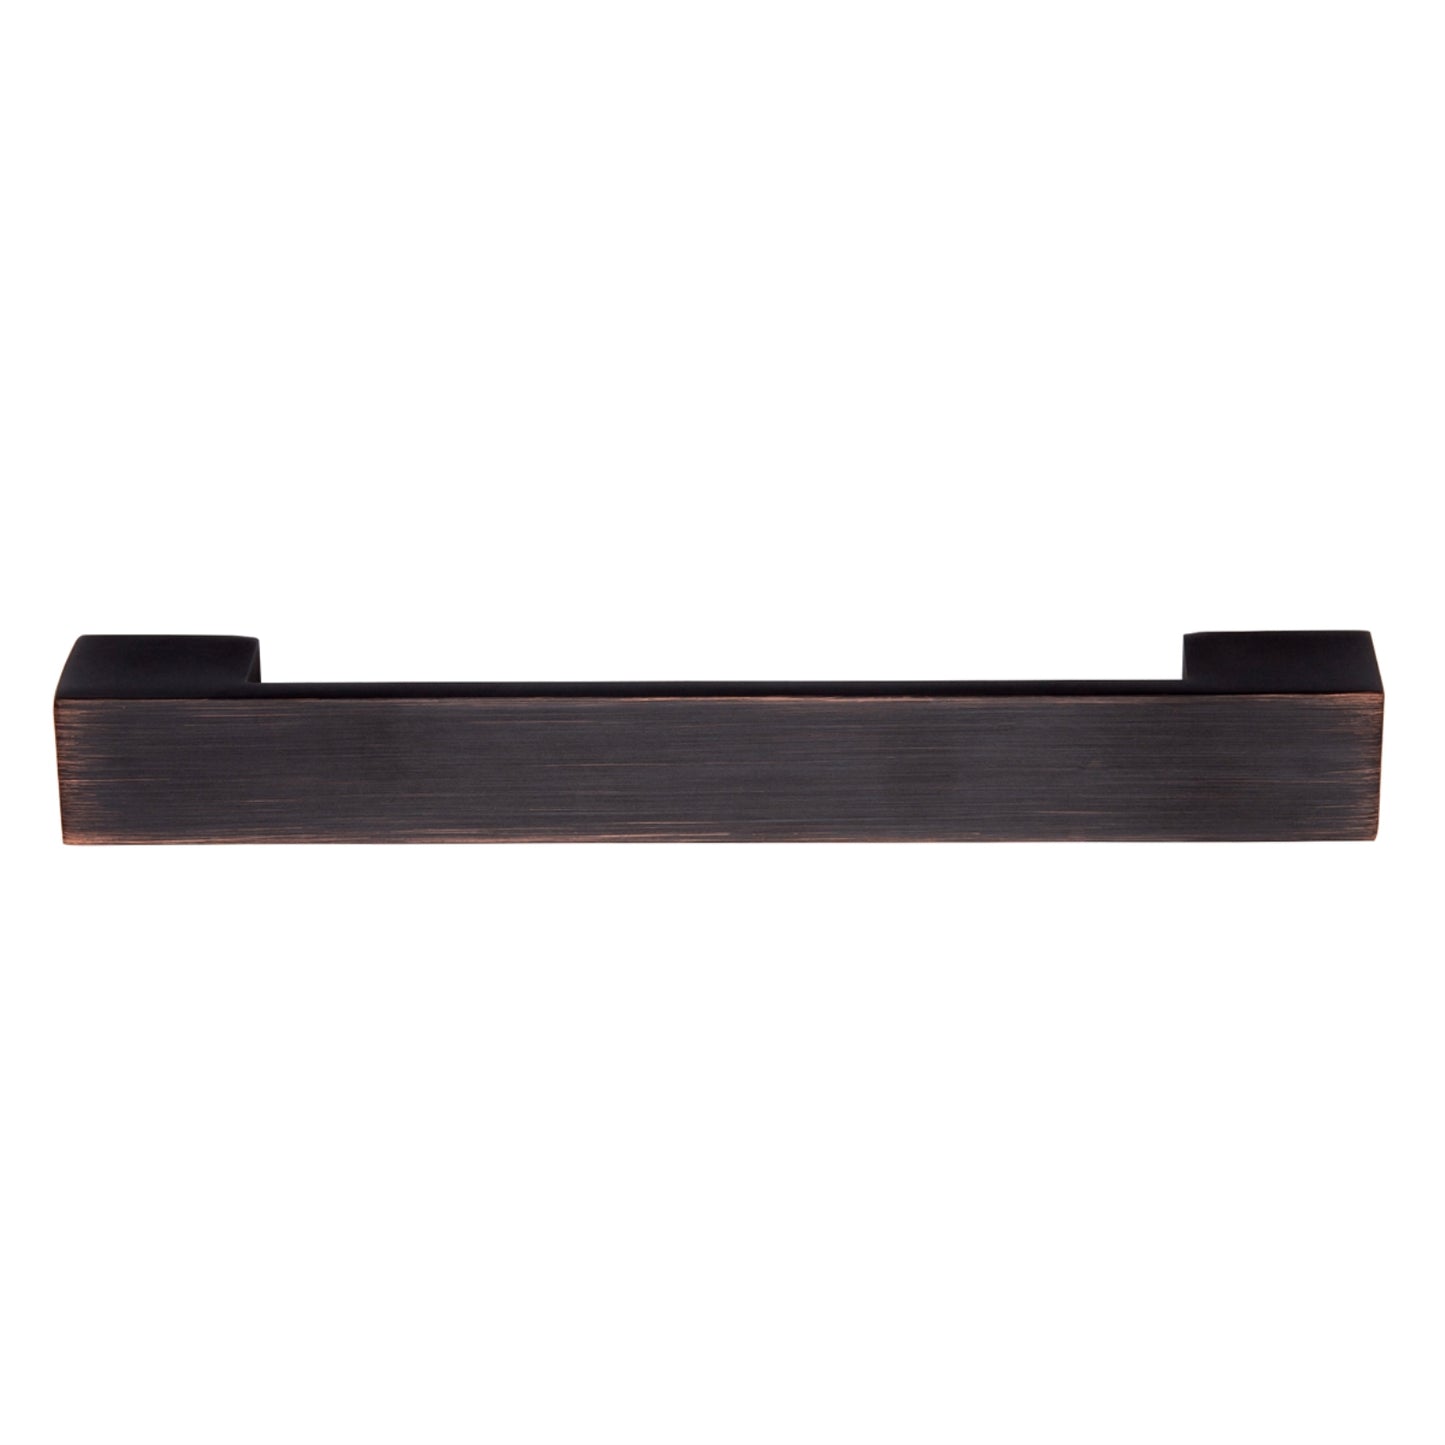 South Main Hardware Short Modern Cabinet Handle, 7.68" Length (6.4" Hole Center), Oil Rubbed Bronze, 10-Pack